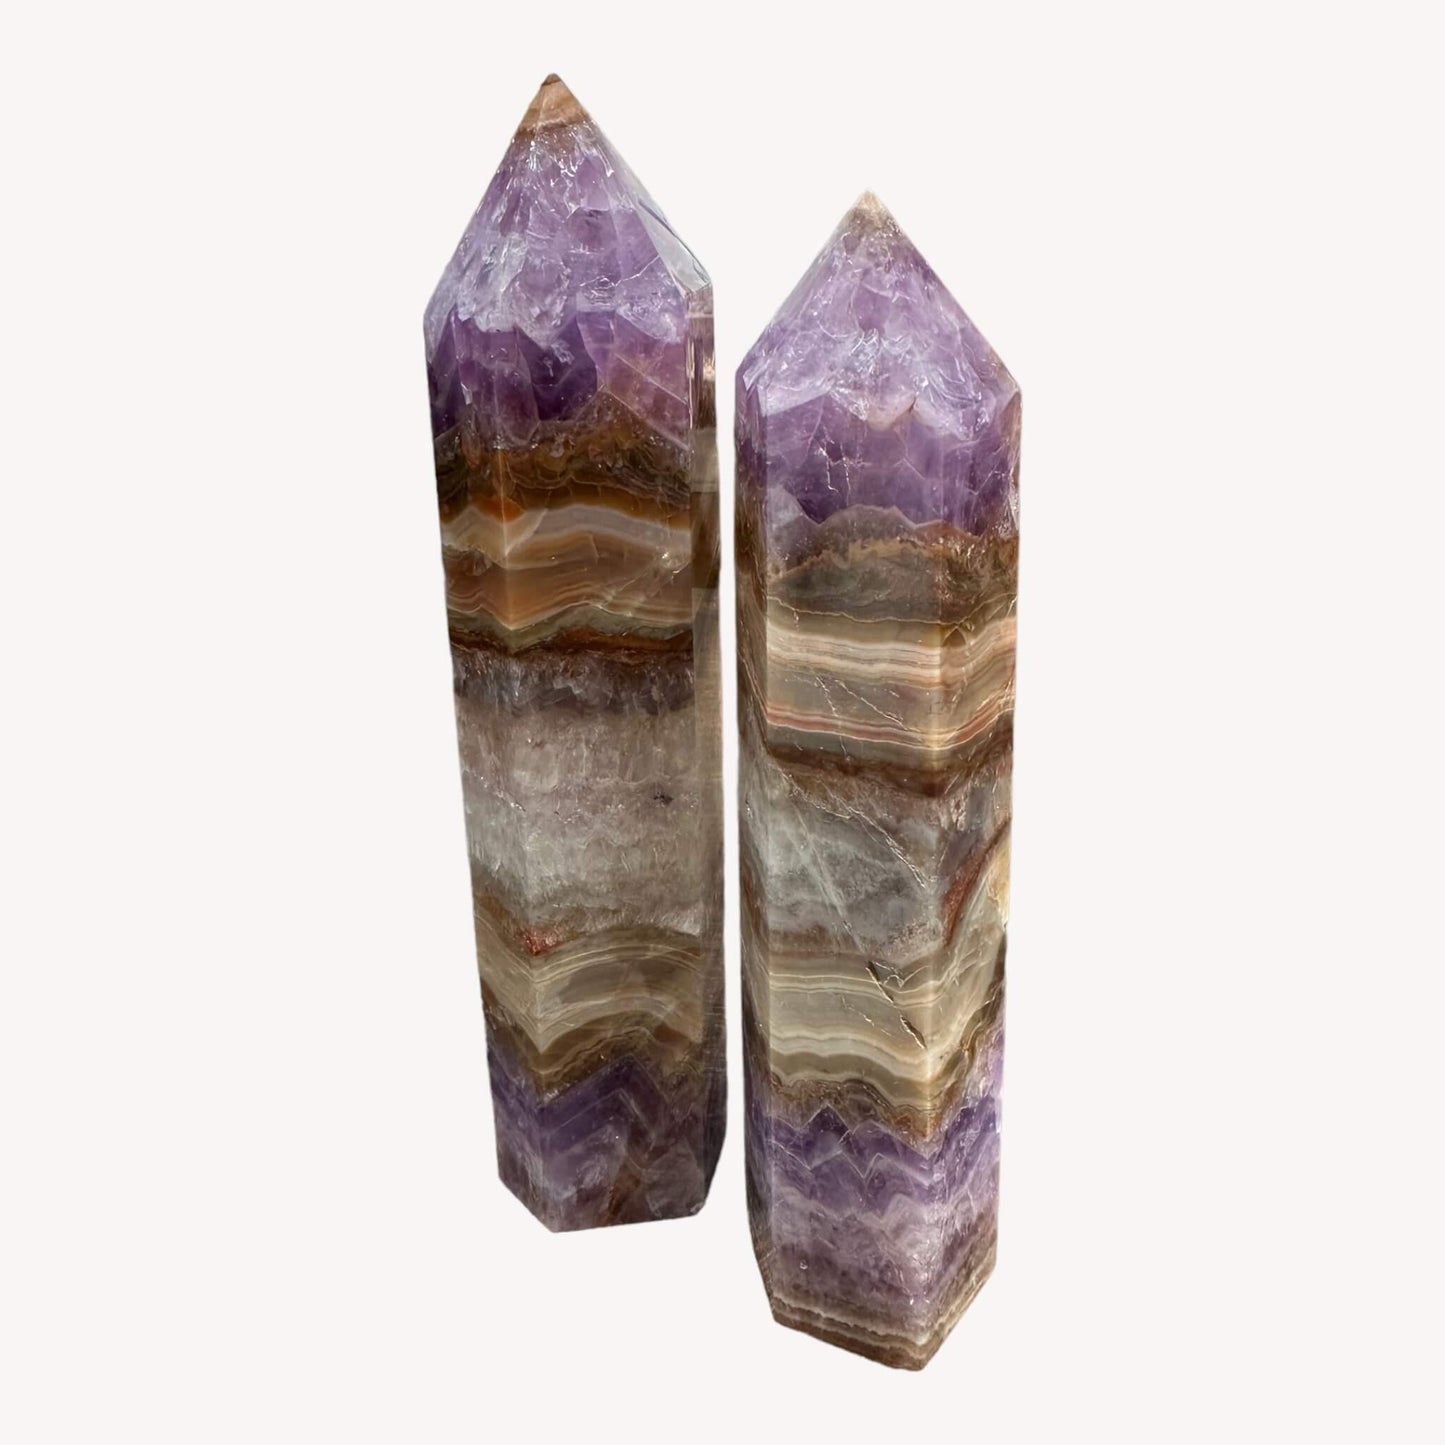 wo Crystal Generators in one image: Crazy Lace Agate and Amethyst. Sizes include 16.5cm and 18cm, showcasing the unique beauty of each crystal. A harmonious blend of natural patterns and vibrant colors."